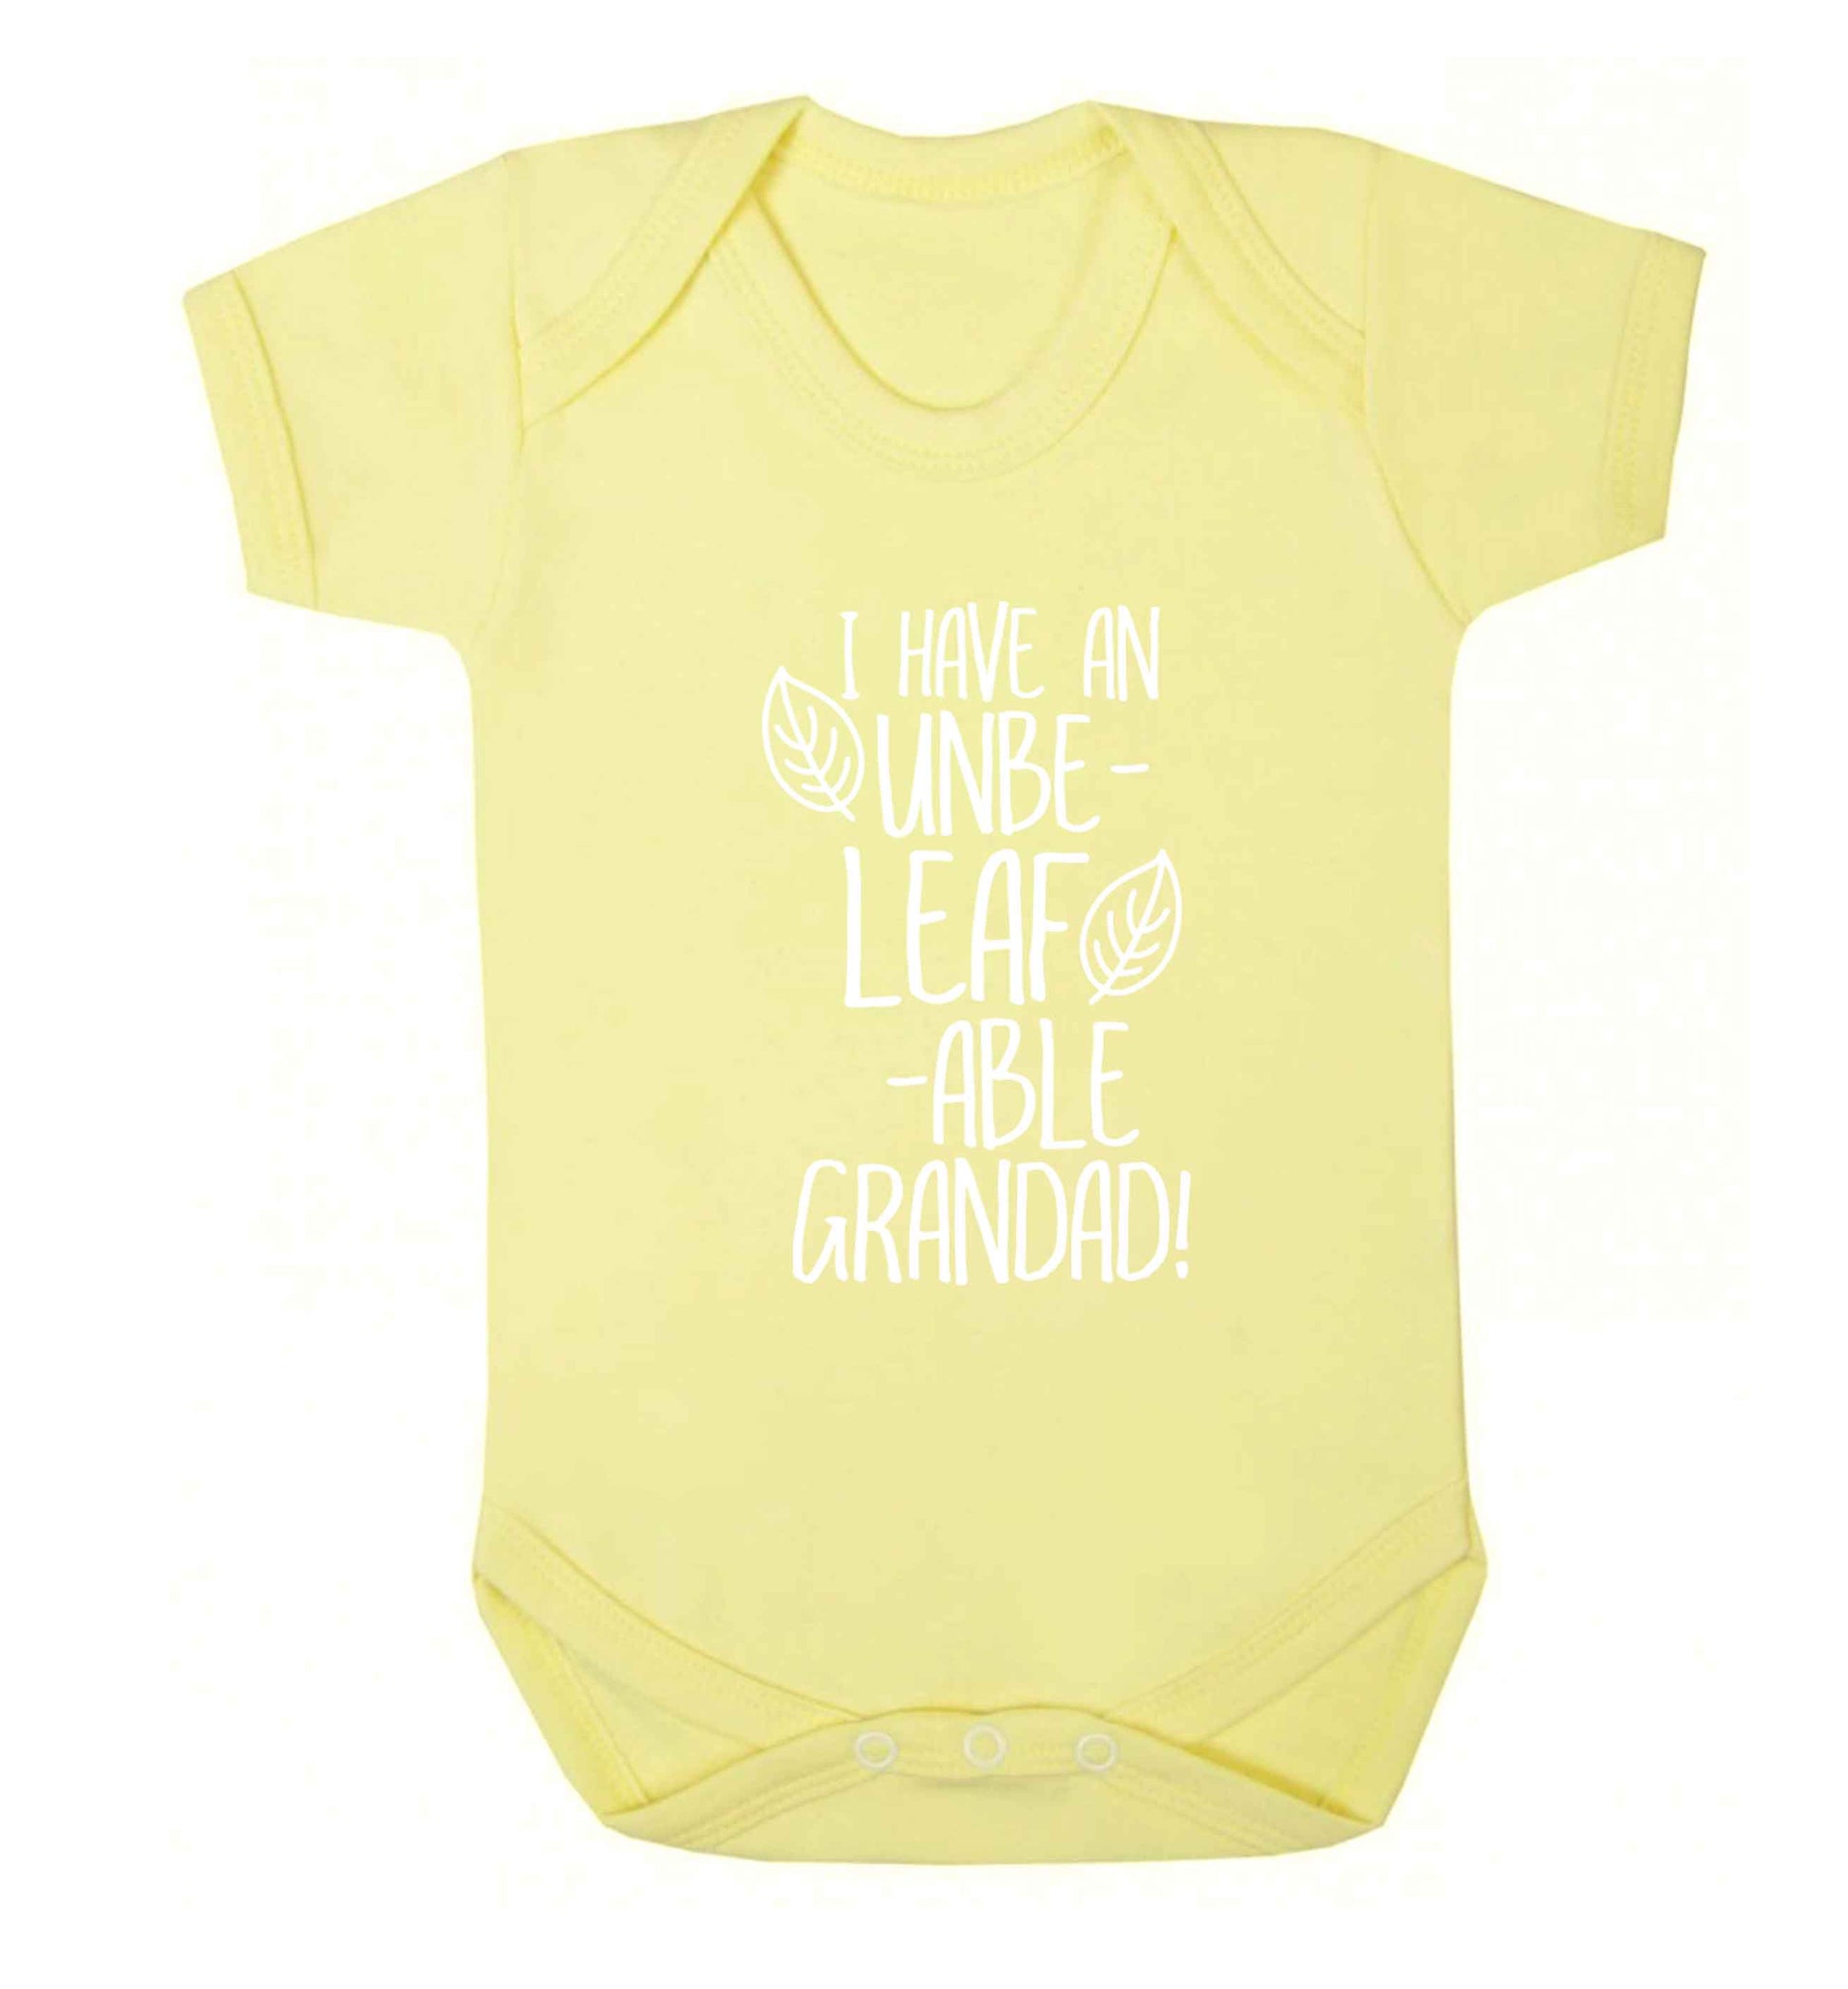 I have an unbe-leaf-able grandad Baby Vest pale yellow 18-24 months